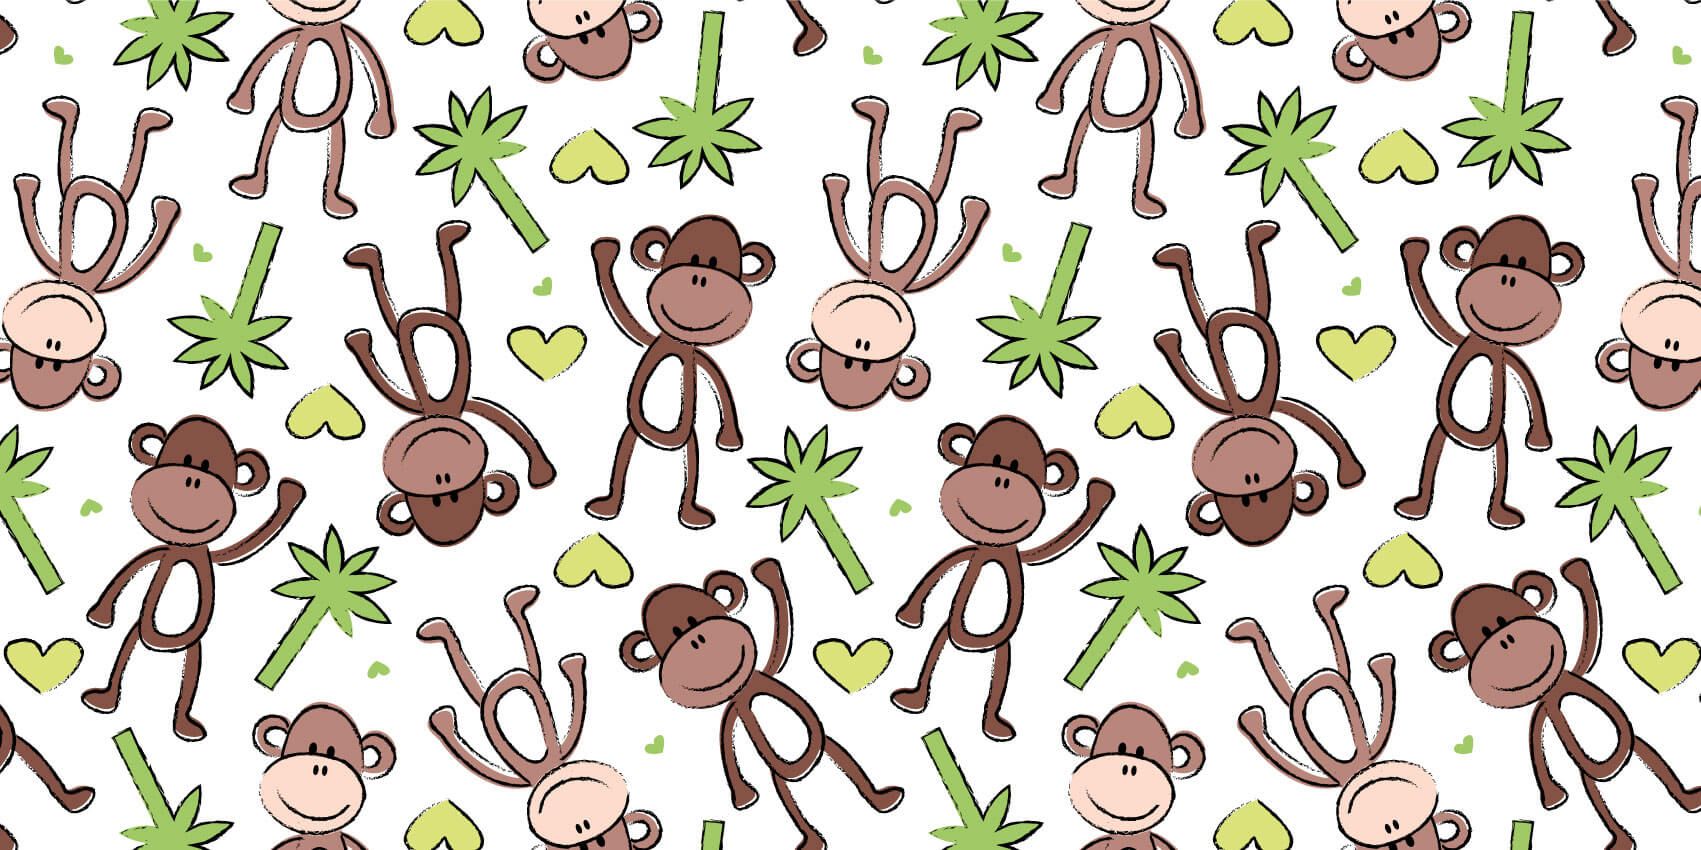 Monkeys and palm trees - Photo Wallpaper